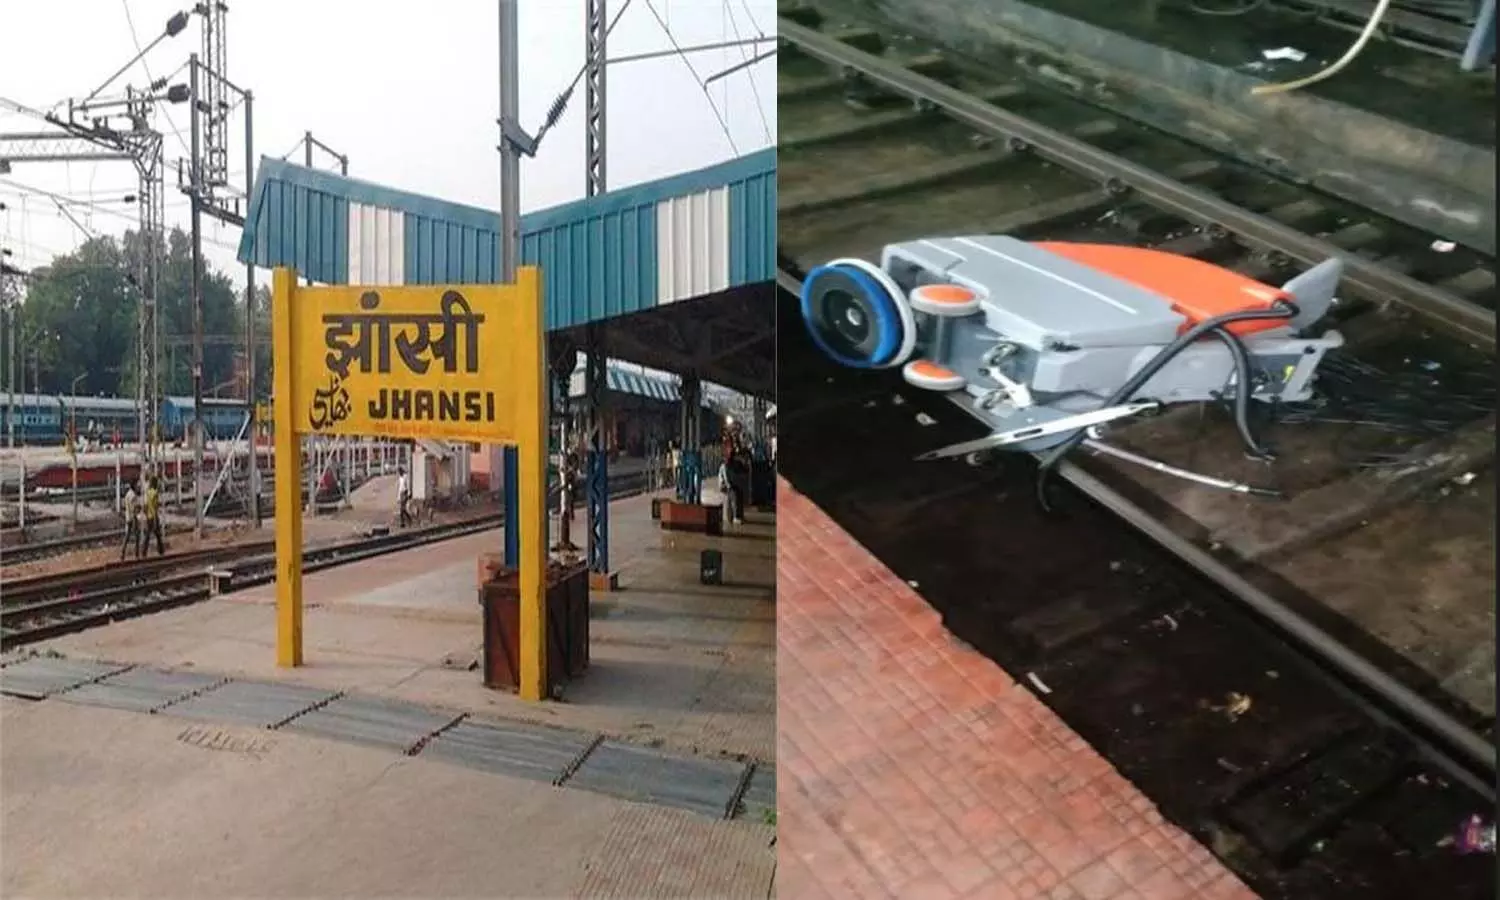 Who threw the machine on the track, did not try to overturn the train at Jhansi railway station?